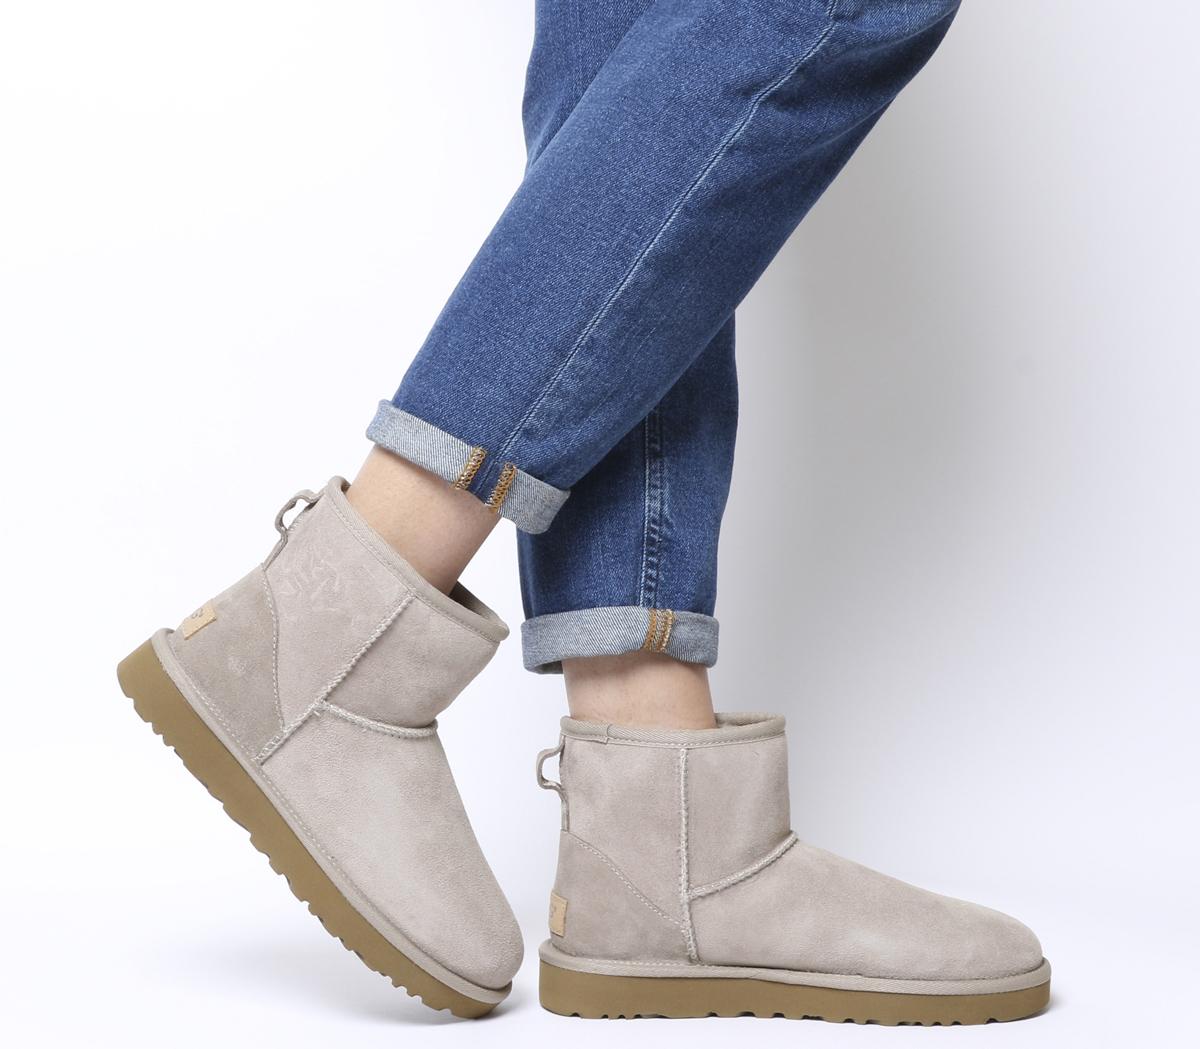 uggs oyster